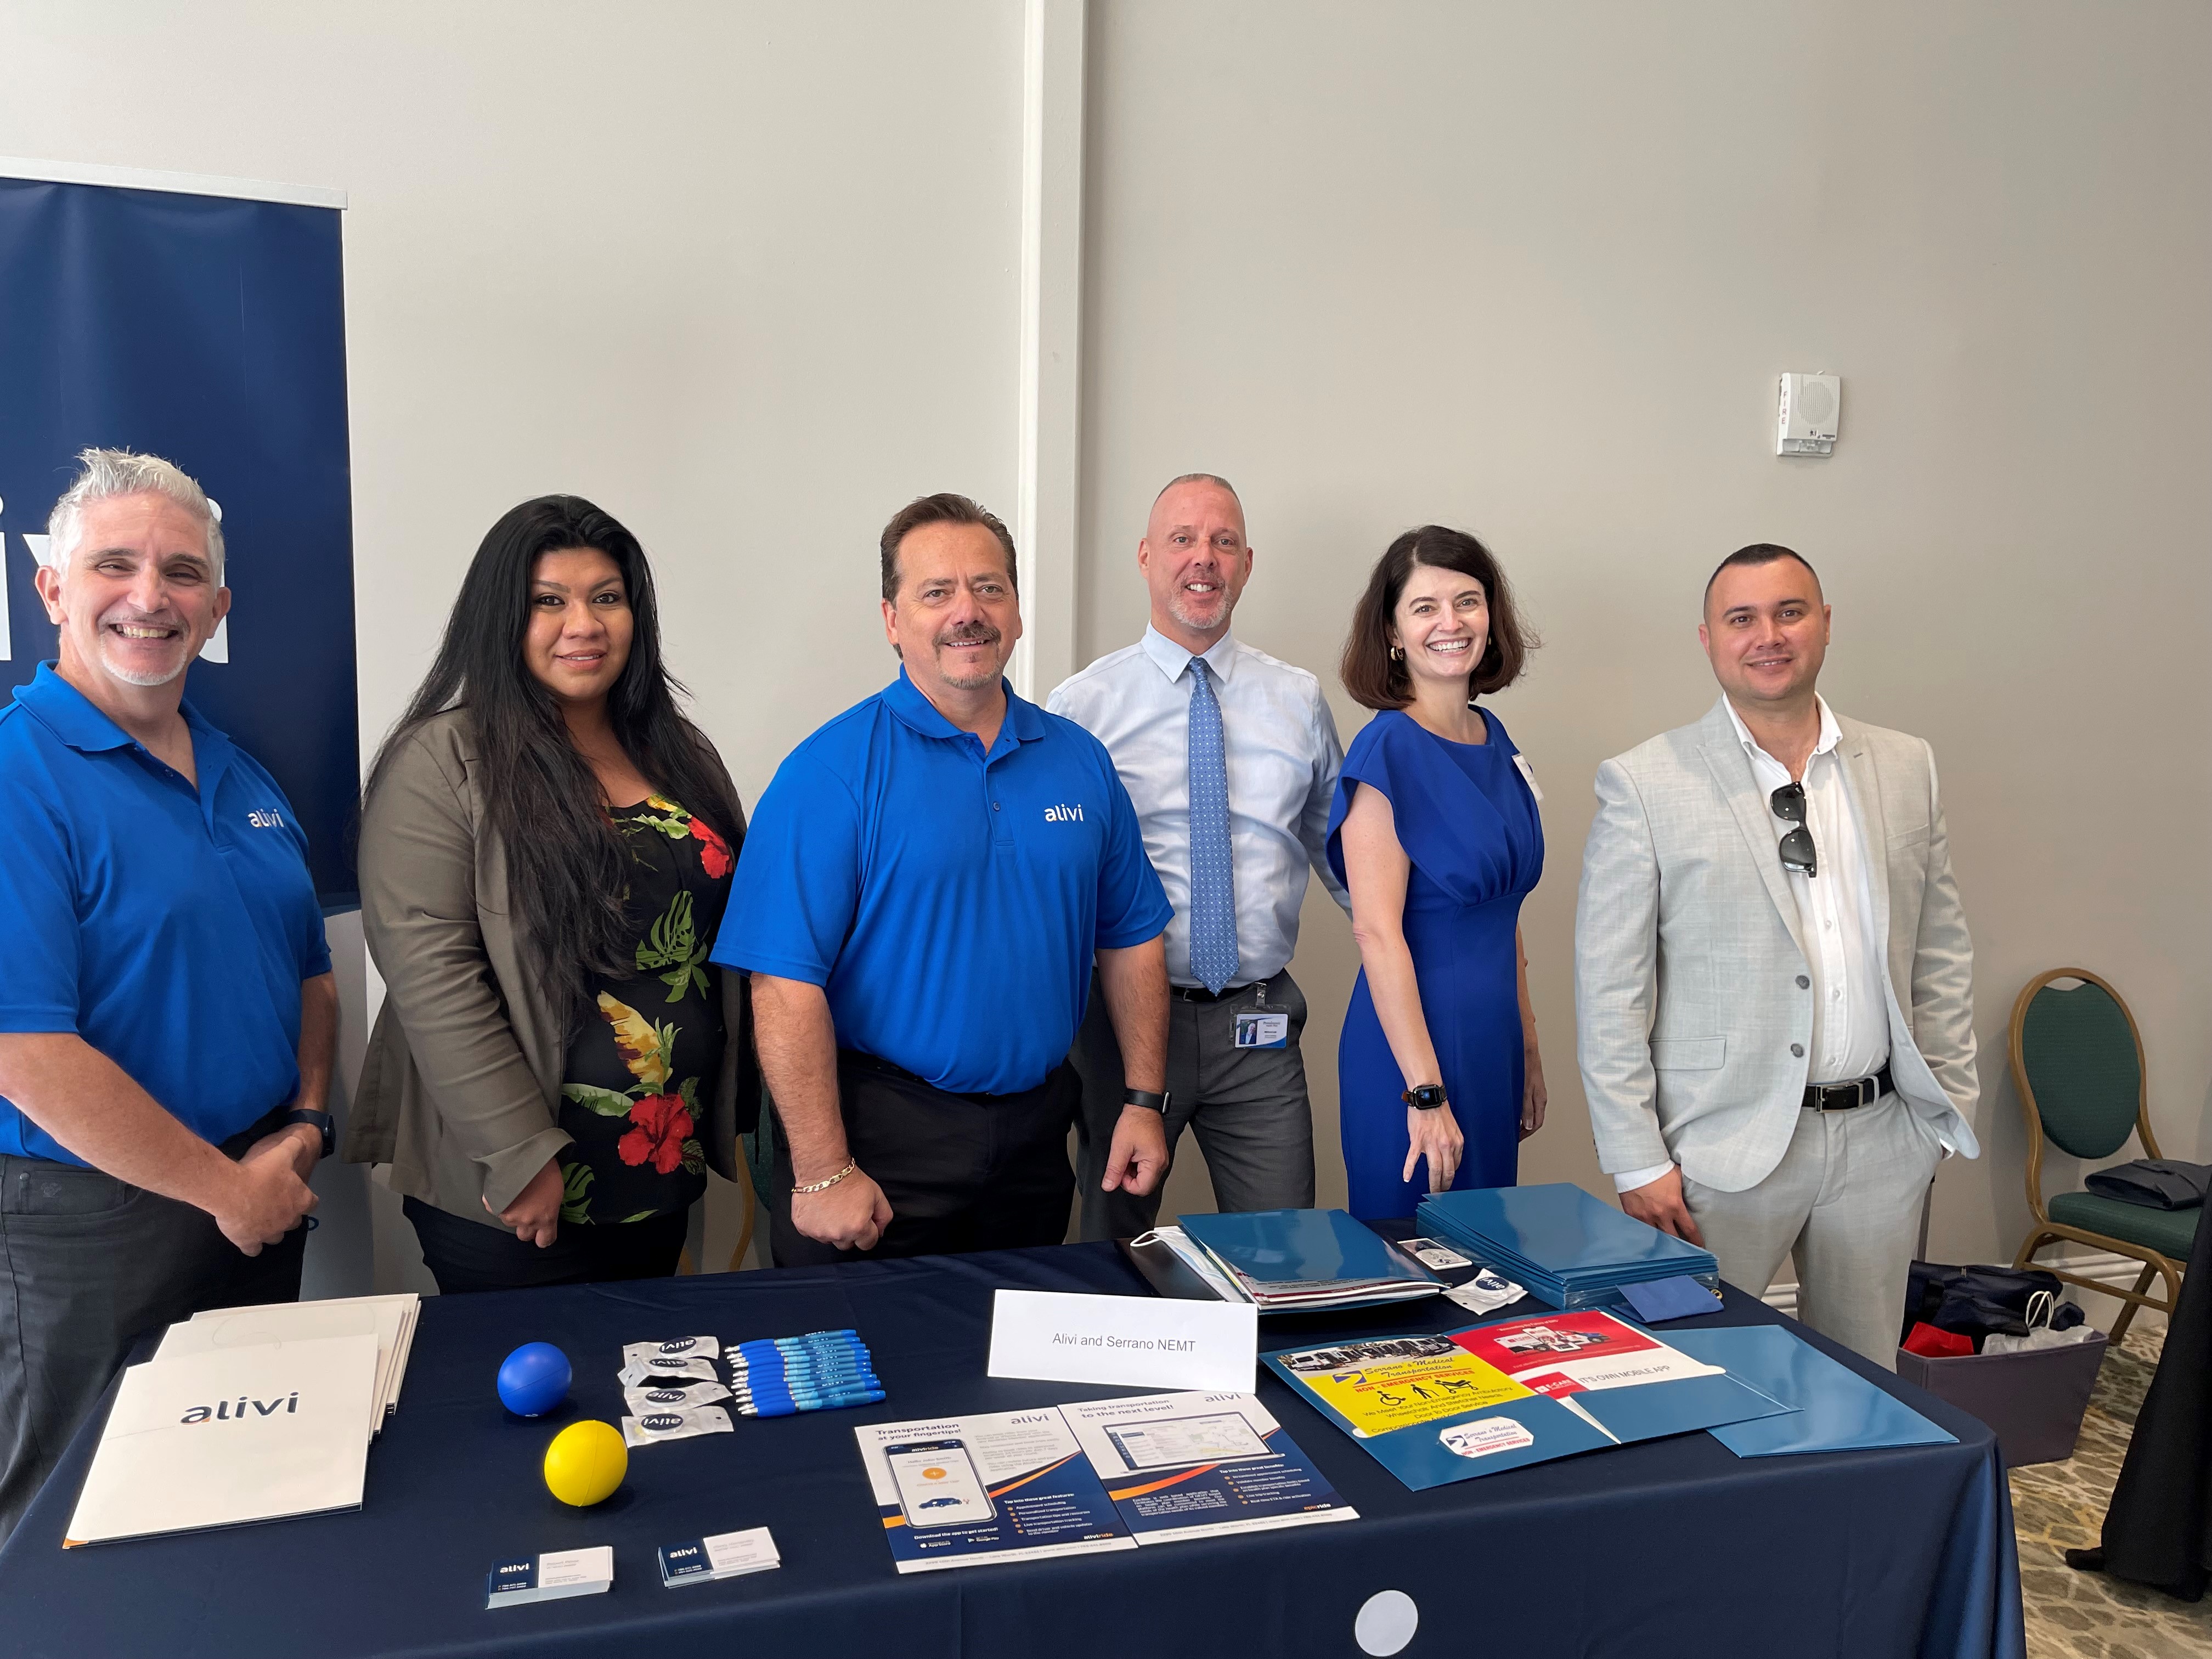 Alivi Participates in the Prominence Health Open House